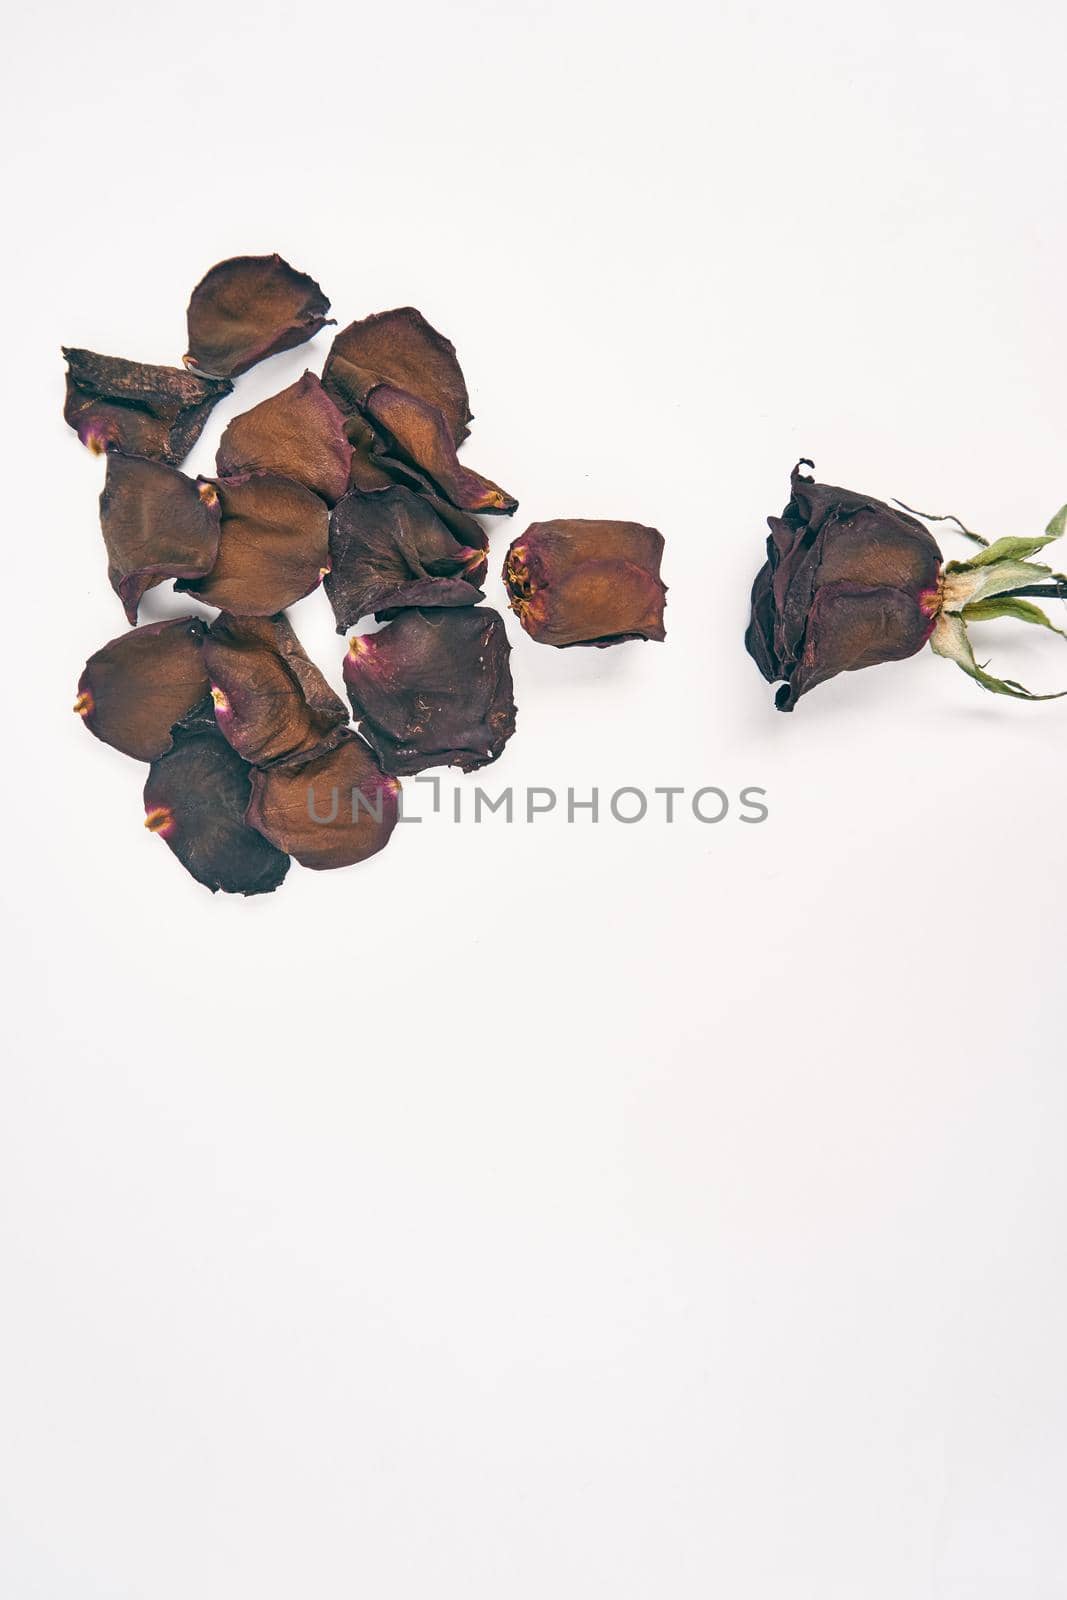 rose petals decoration cinnamon object light background by Vichizh